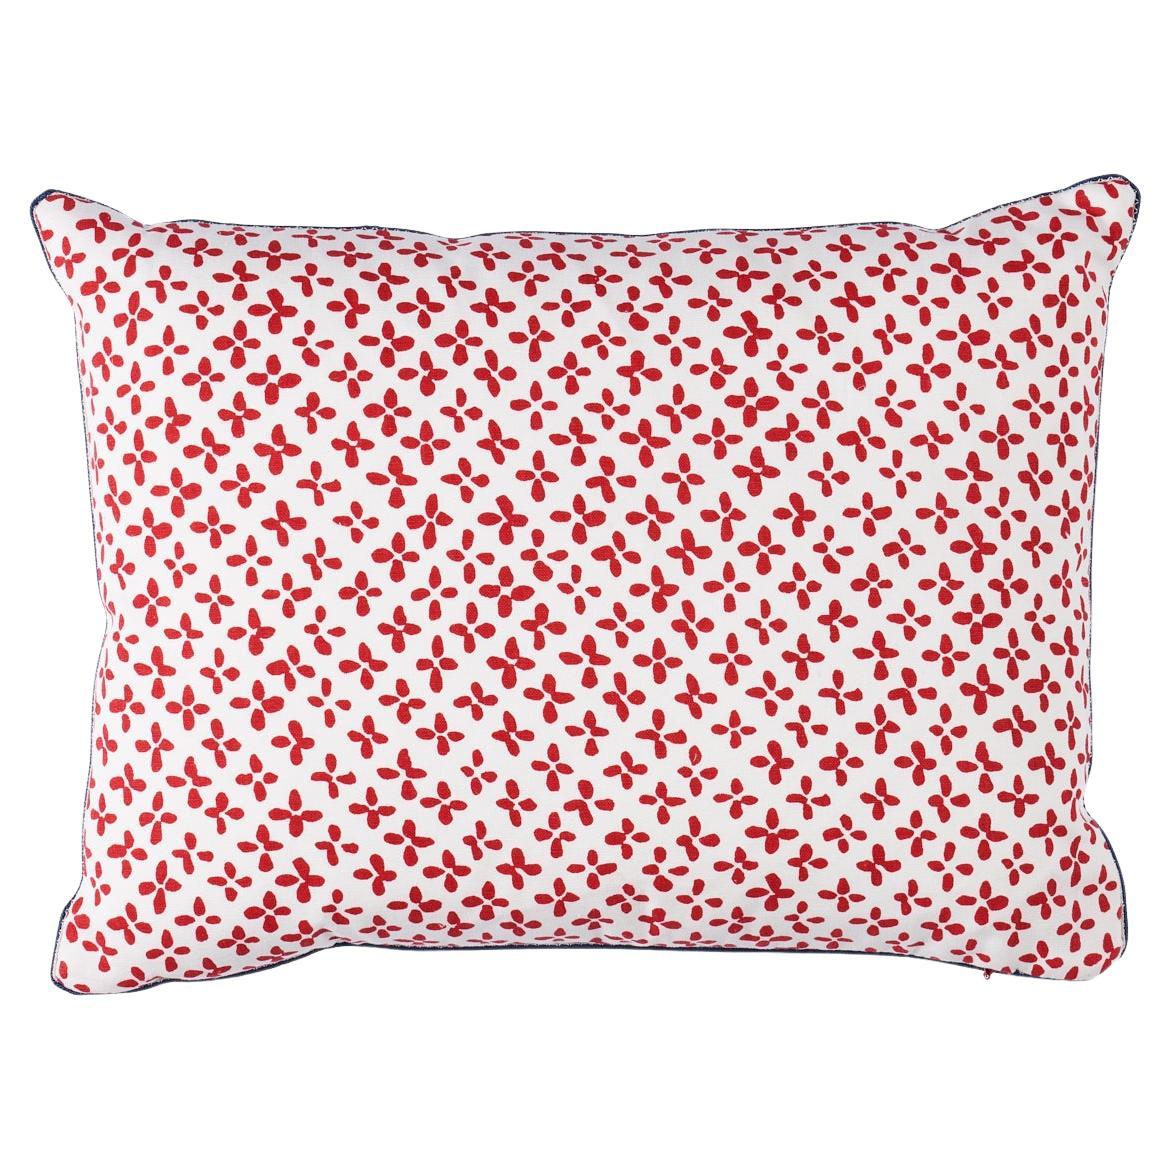 Schumacher Emerson 18" x 12" Pillow in Red For Sale